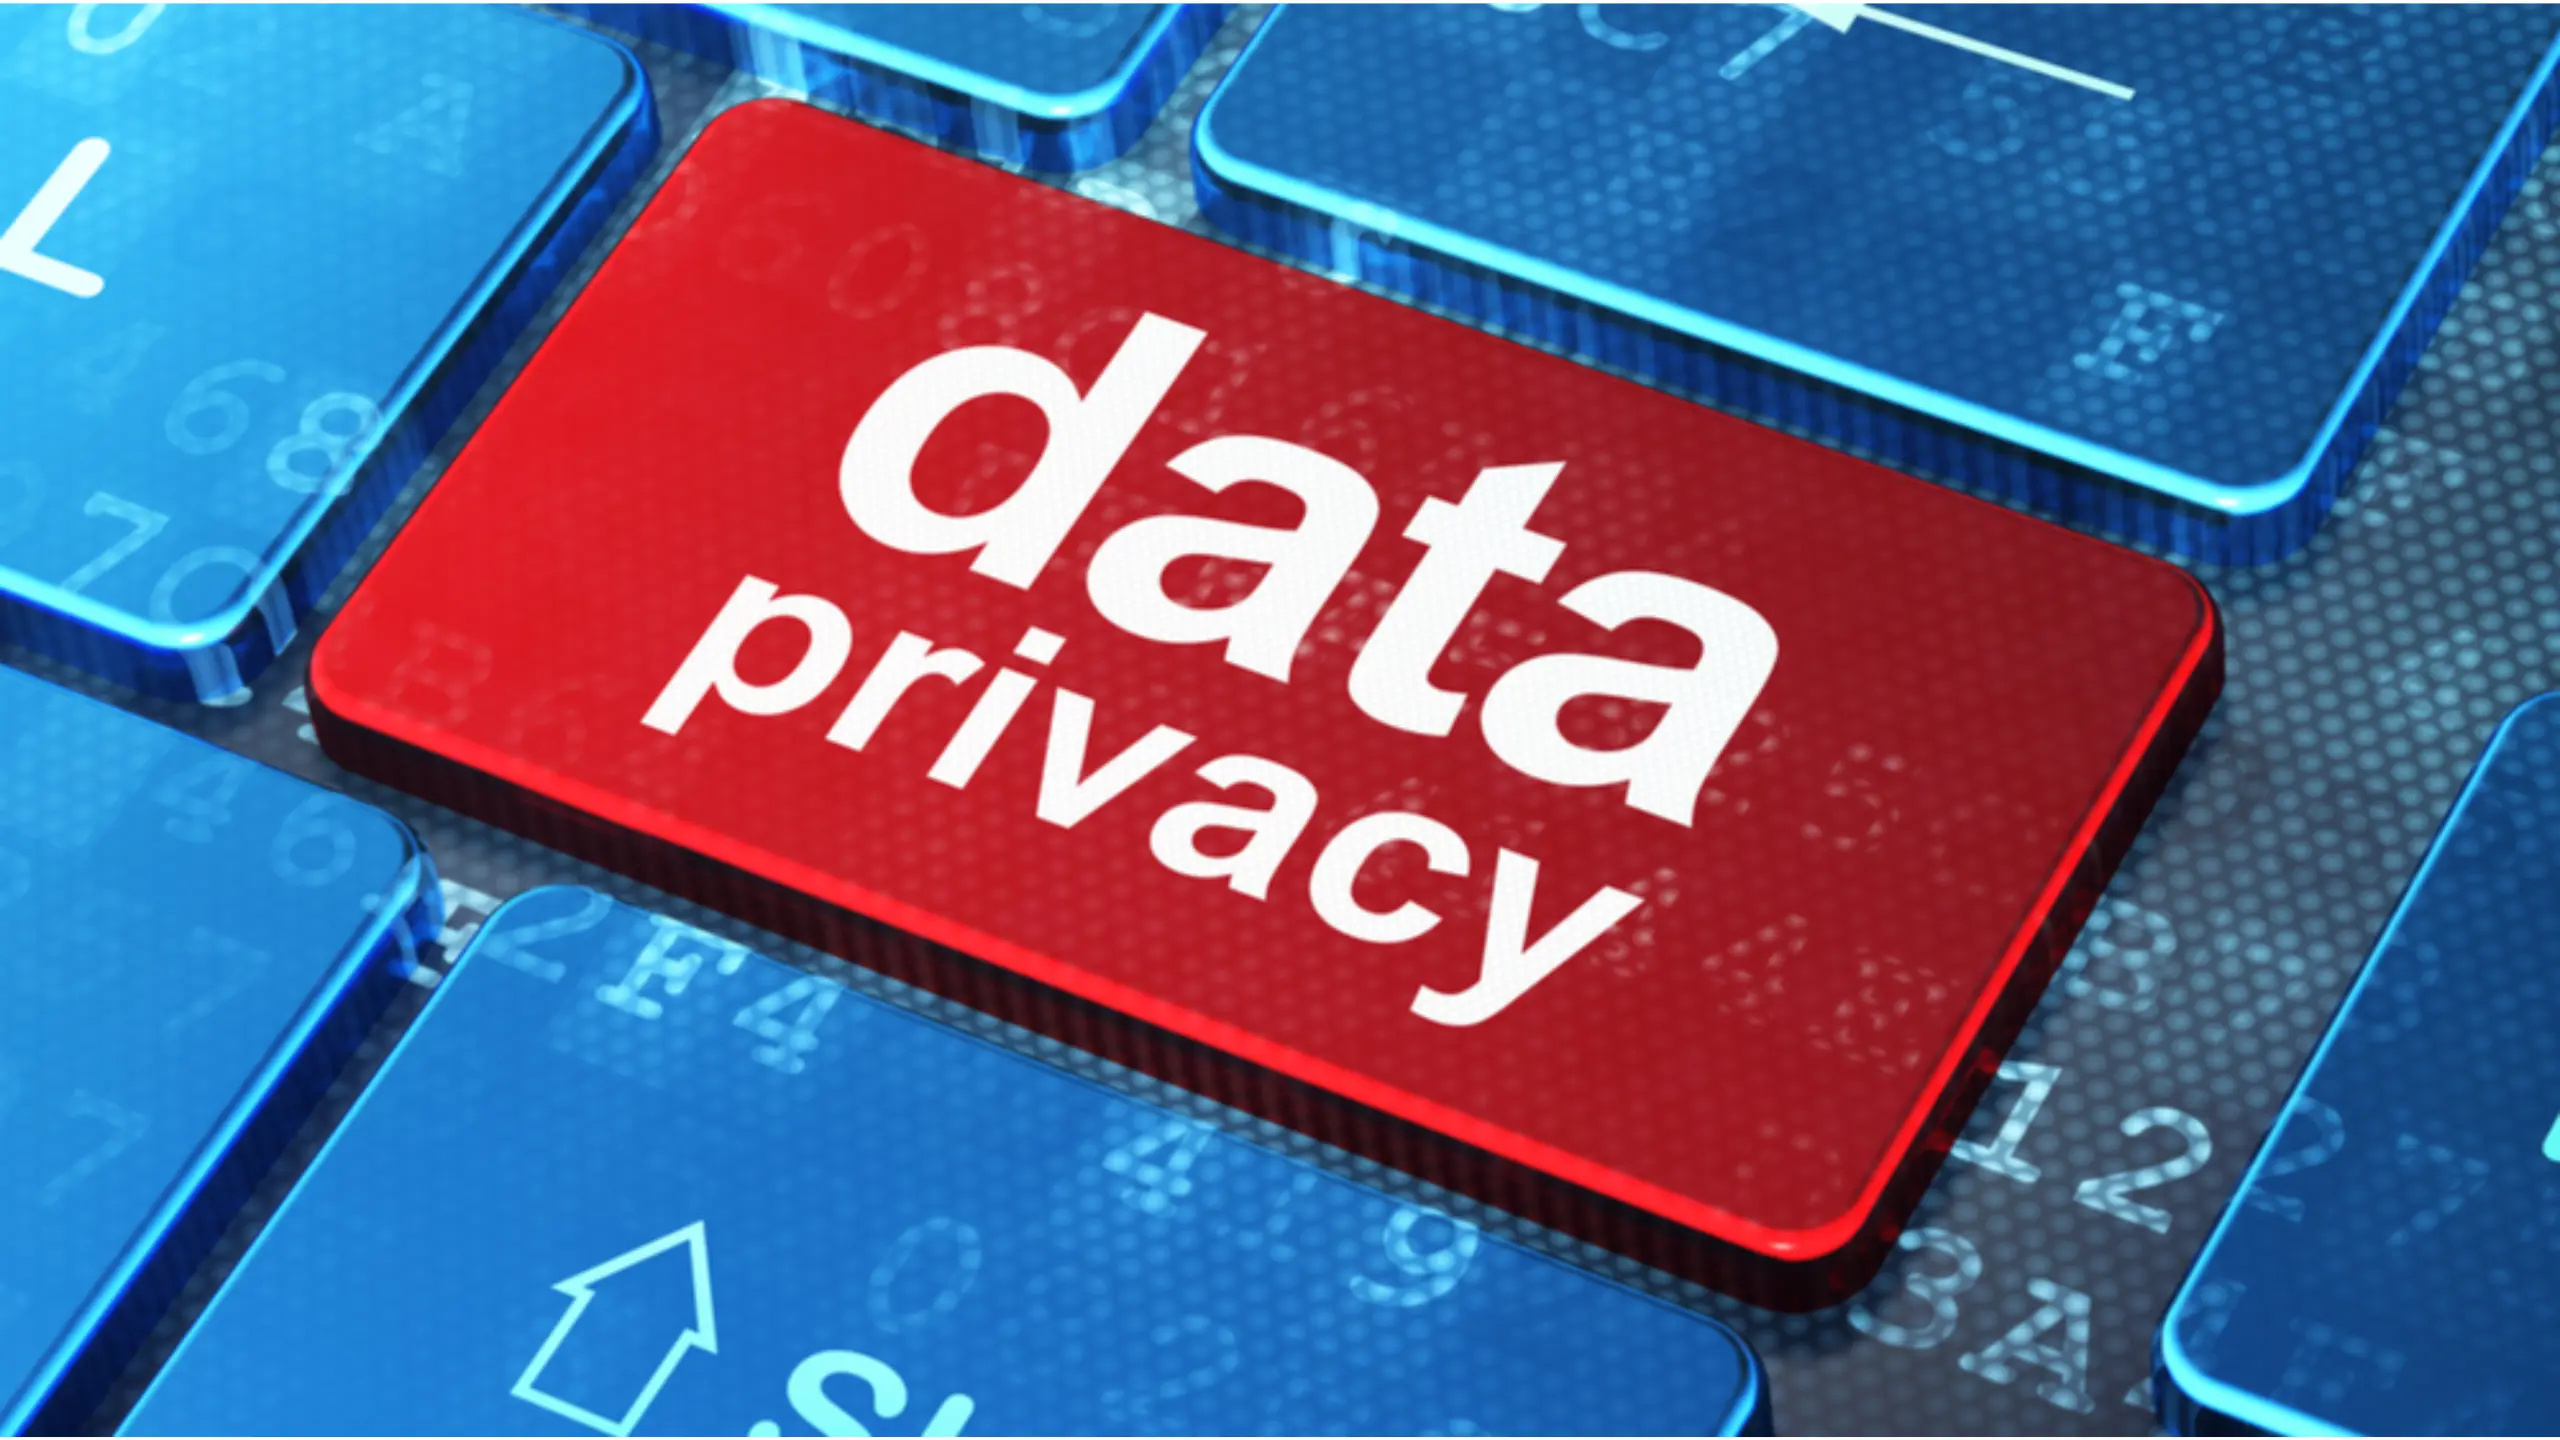 8 Tips to Help Keep Your Business Data Private and Secure